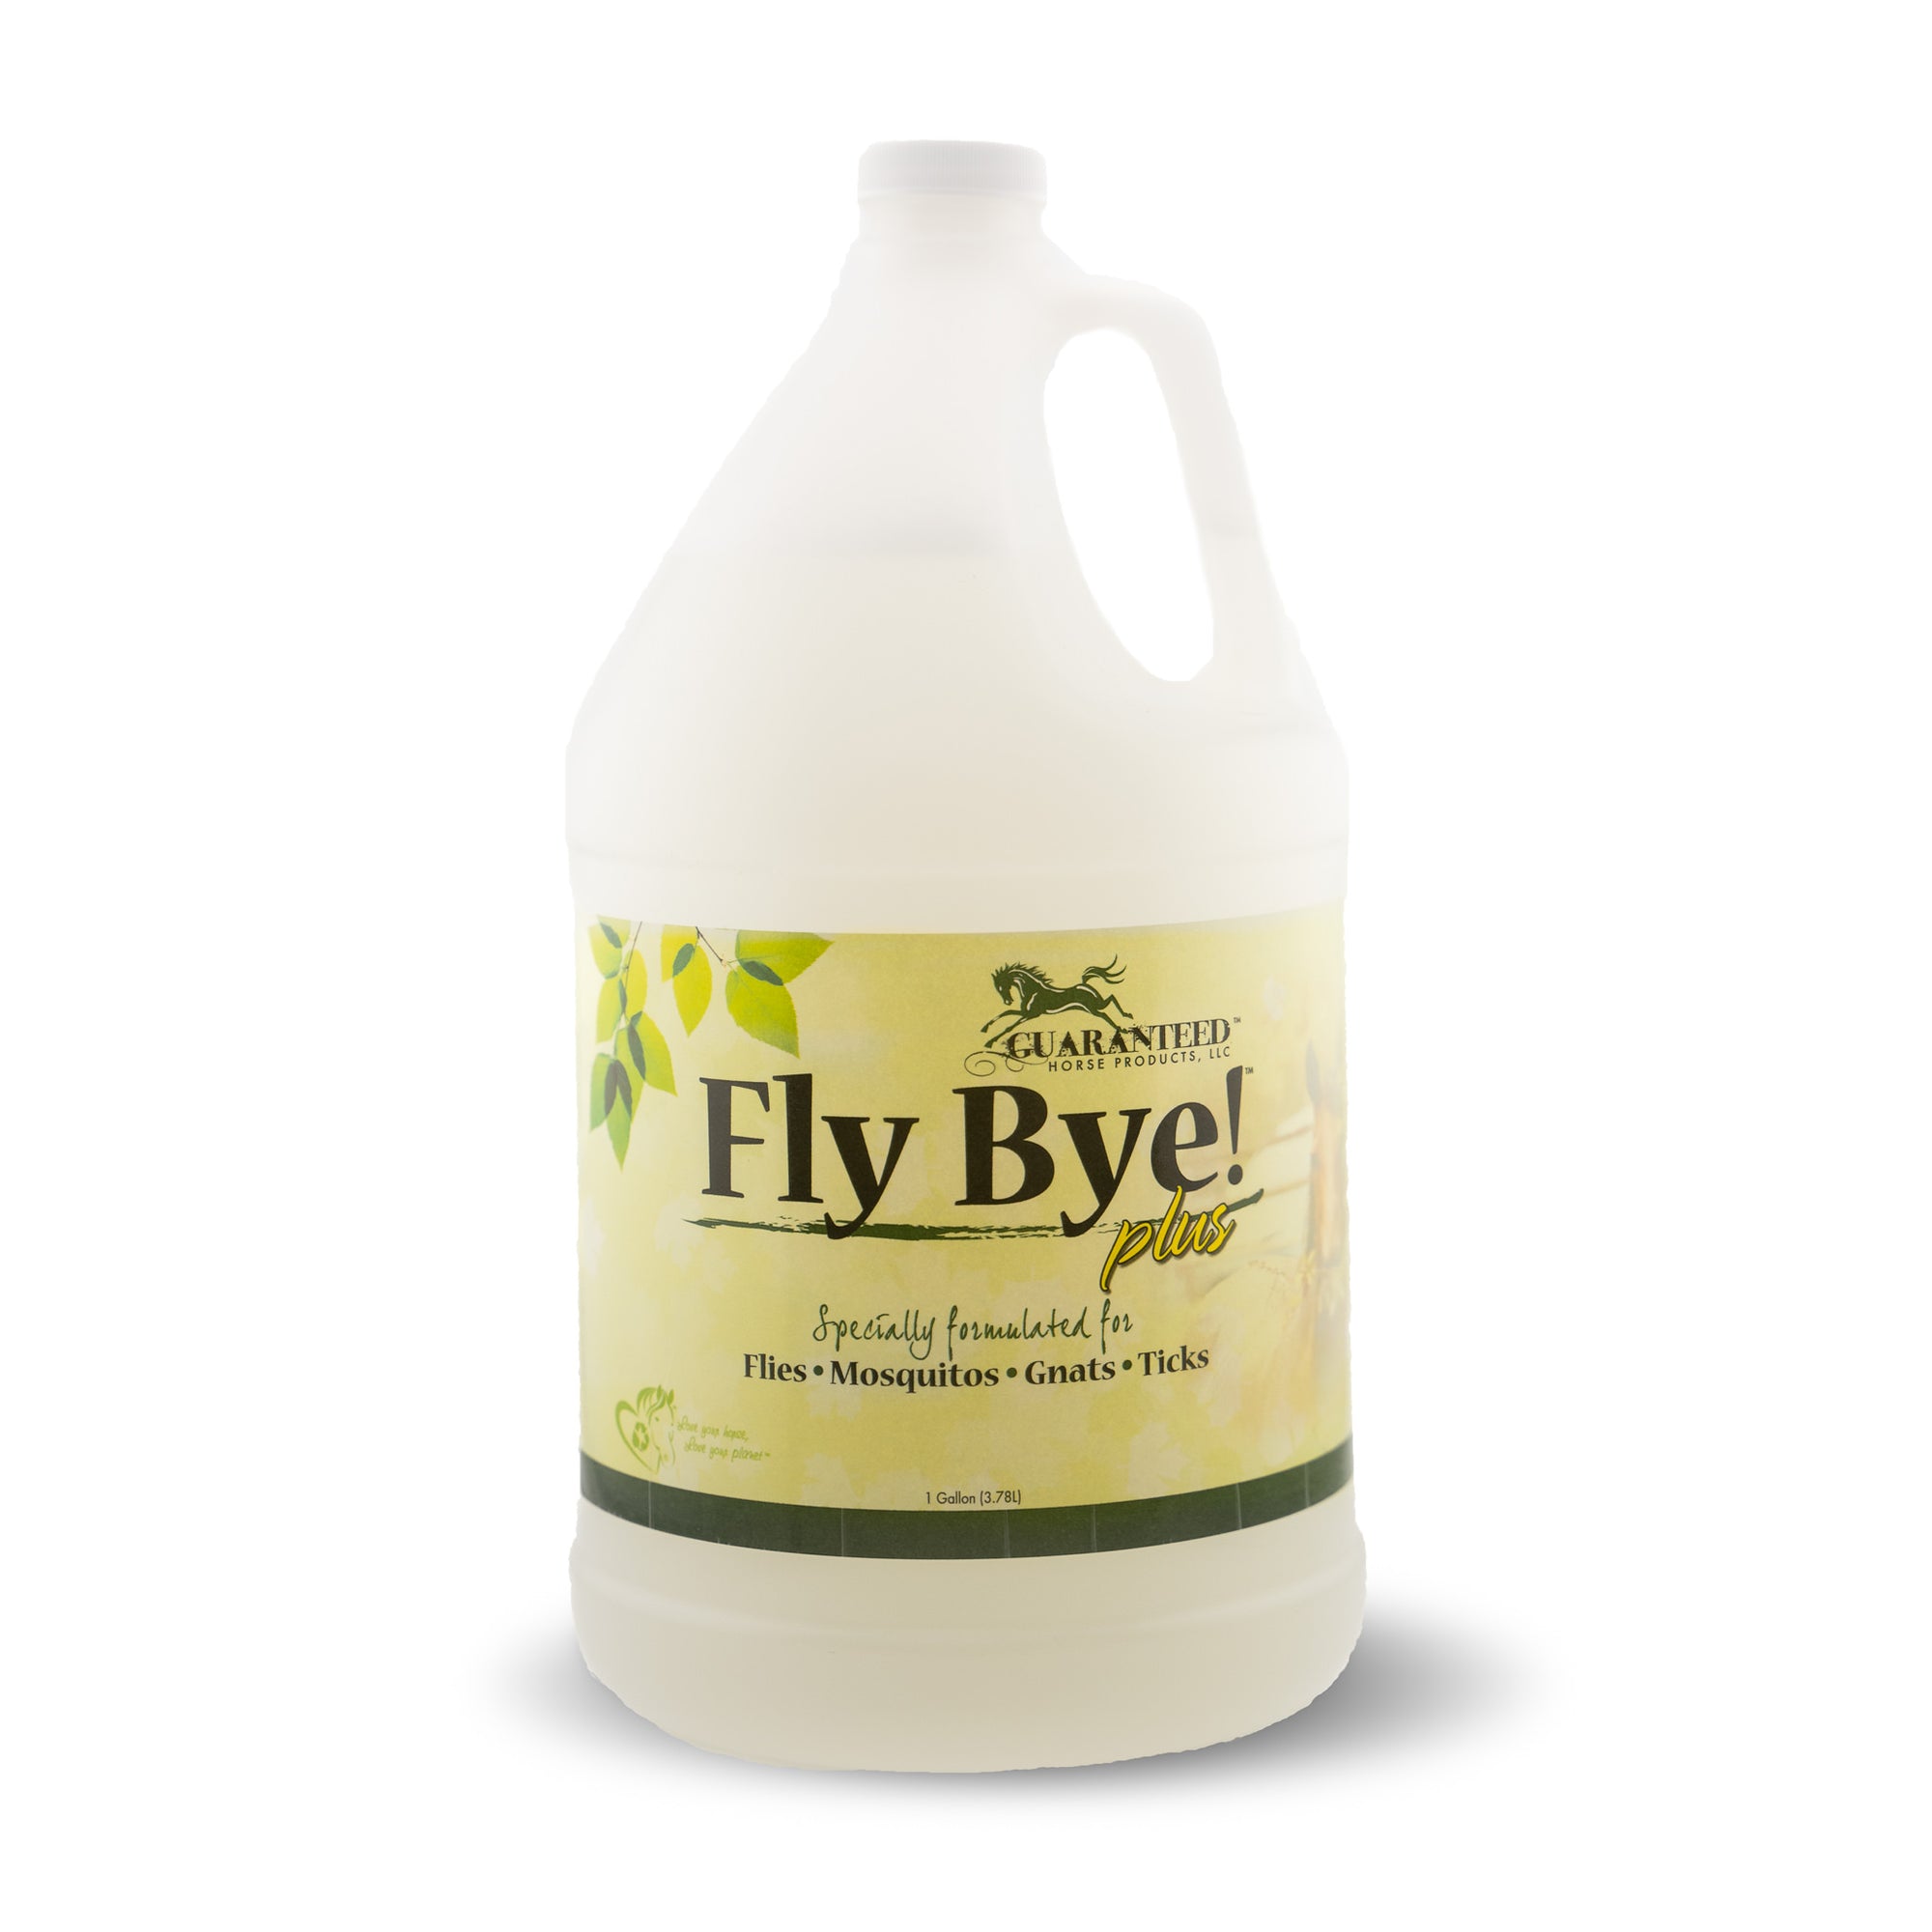 Fly Bye! Plus mobile fly spray refill, one gallon